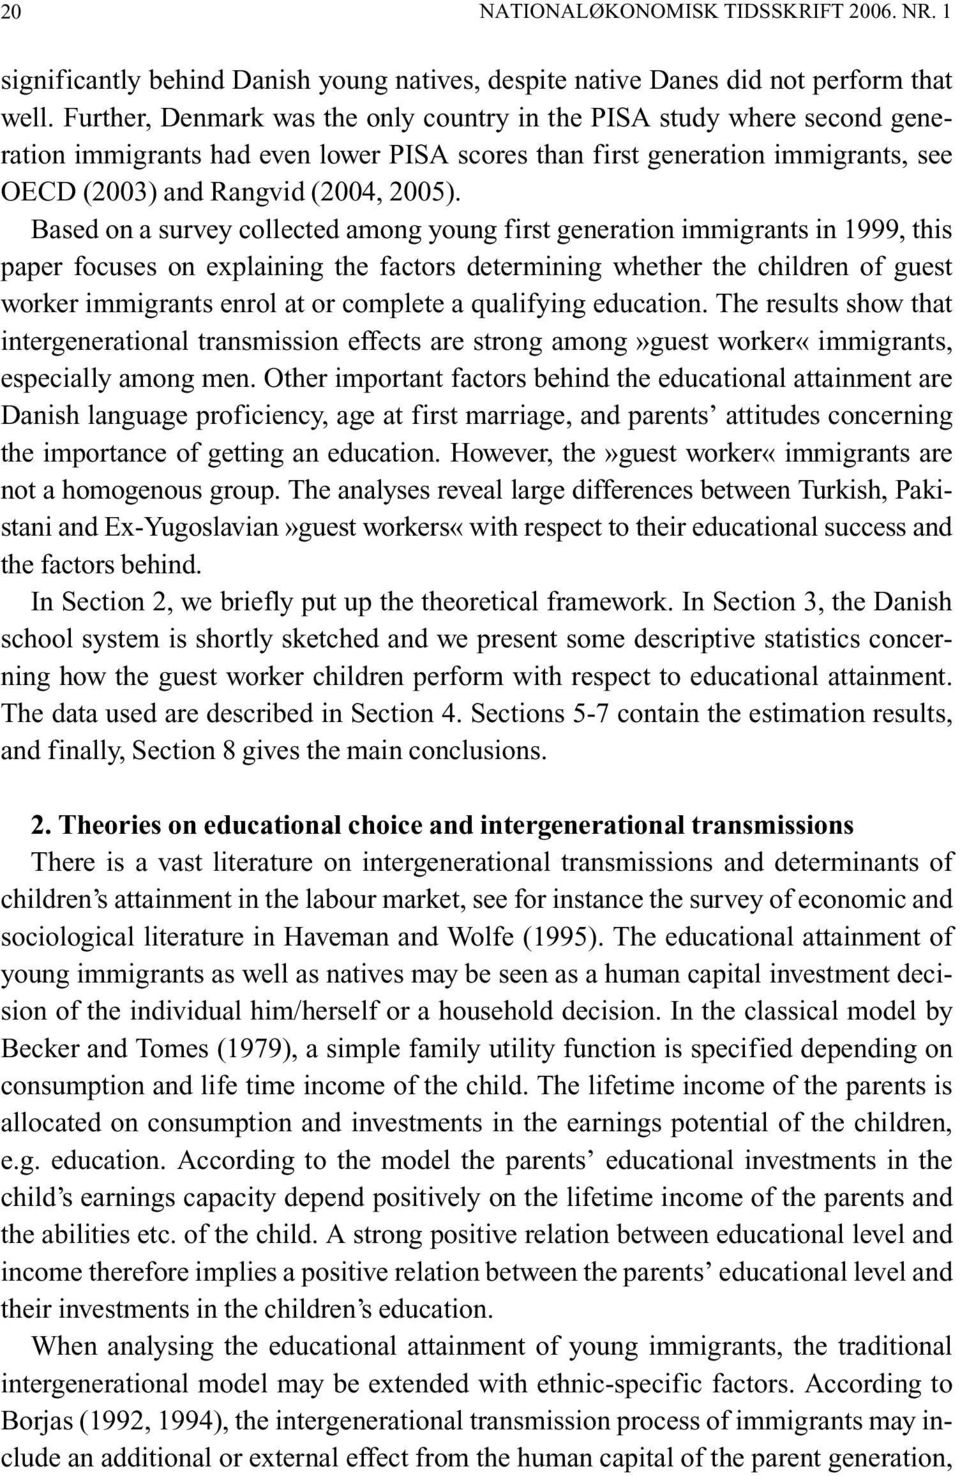 Based on a survey collected among young first generation immigrants in 1999, this paper focuses on explaining the factors determining whether the children of guest worker immigrants enrol at or